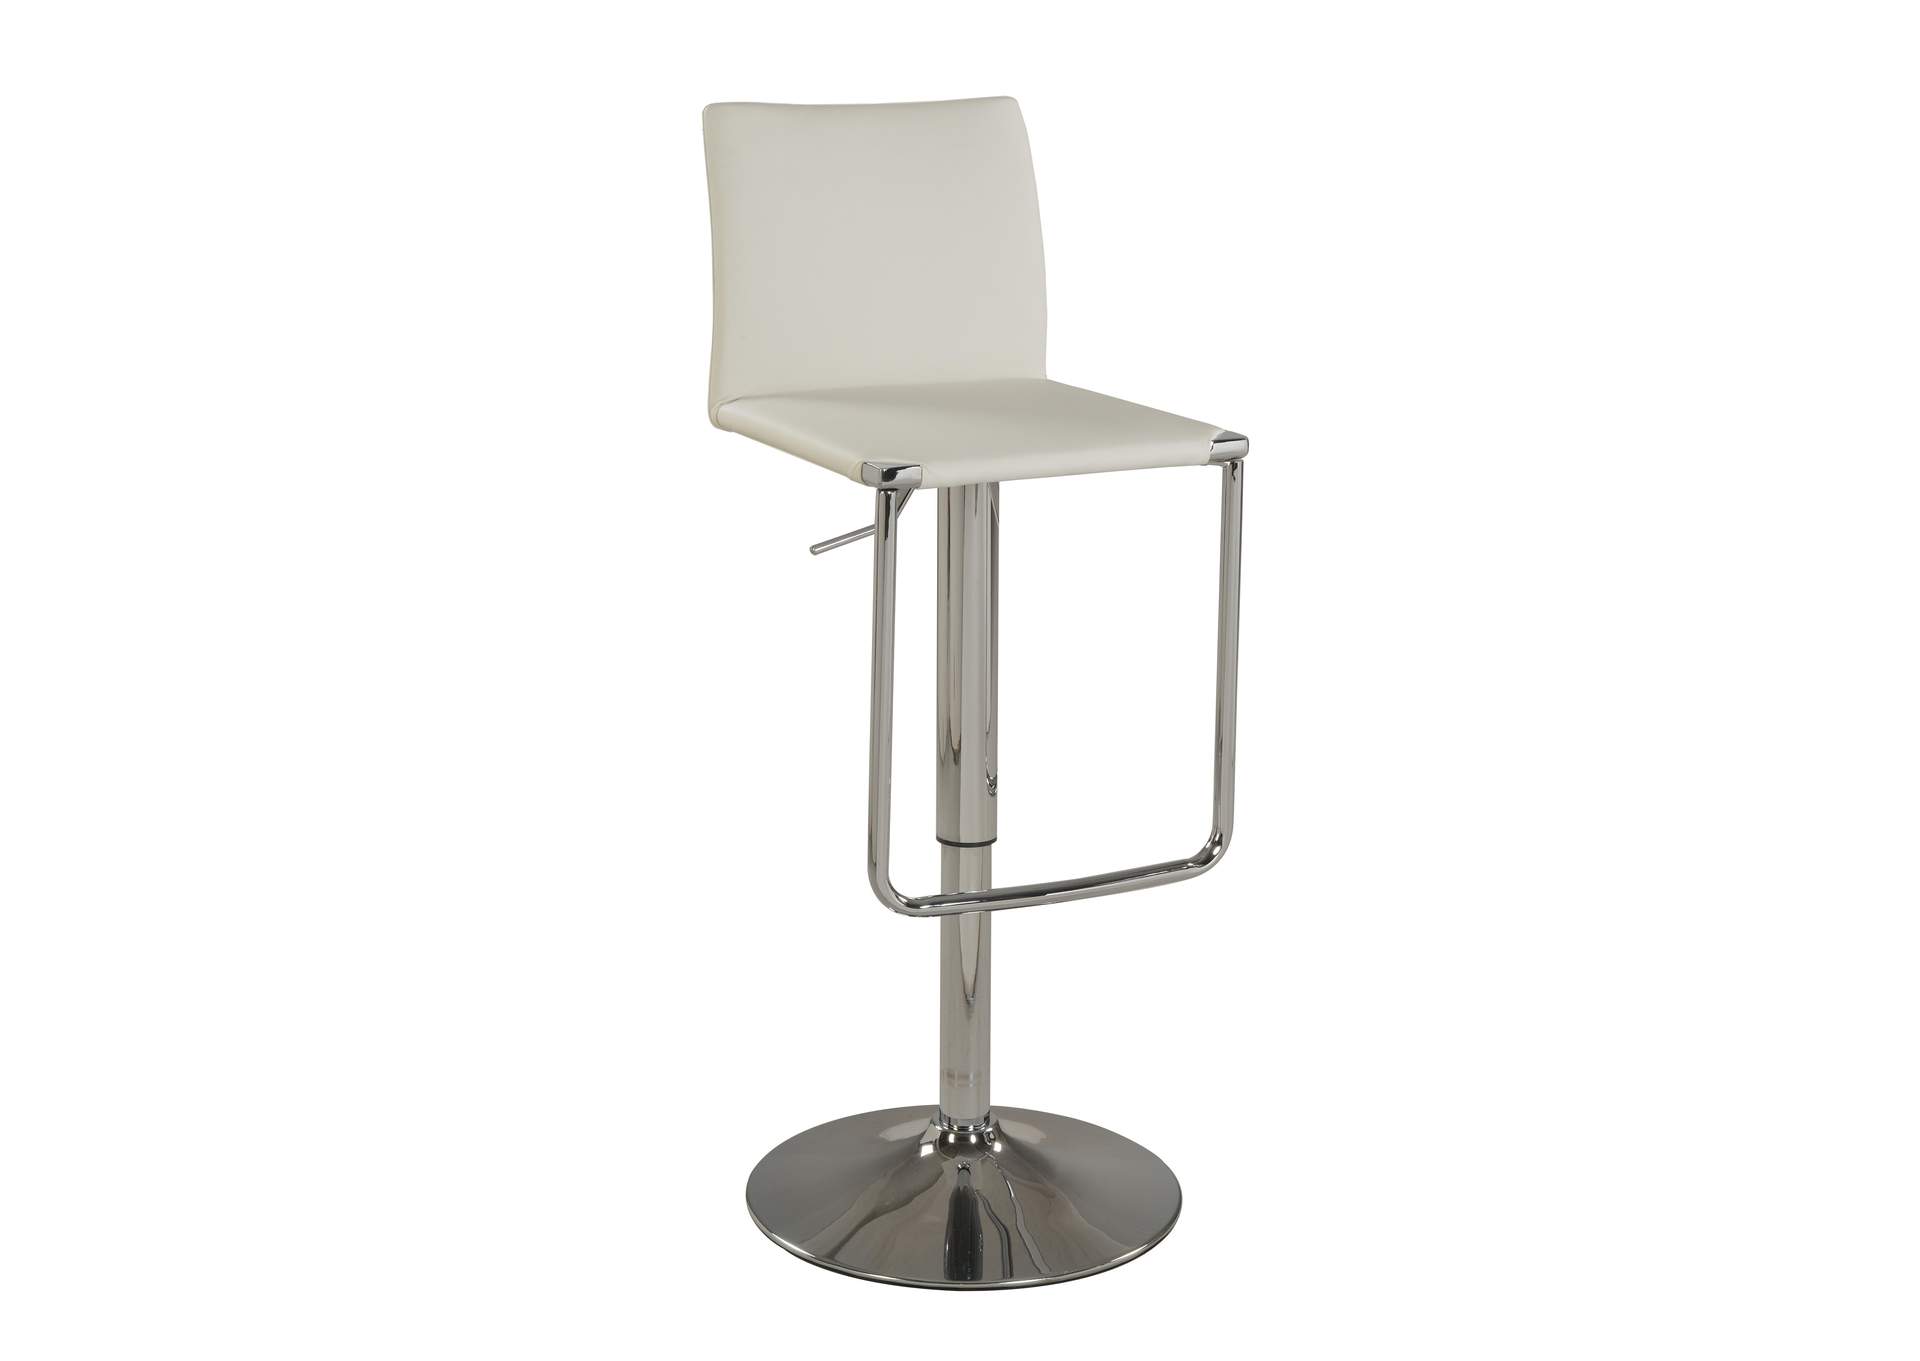 Pneumatic-Adjustable Height Swivel Stool,Chintaly Imports